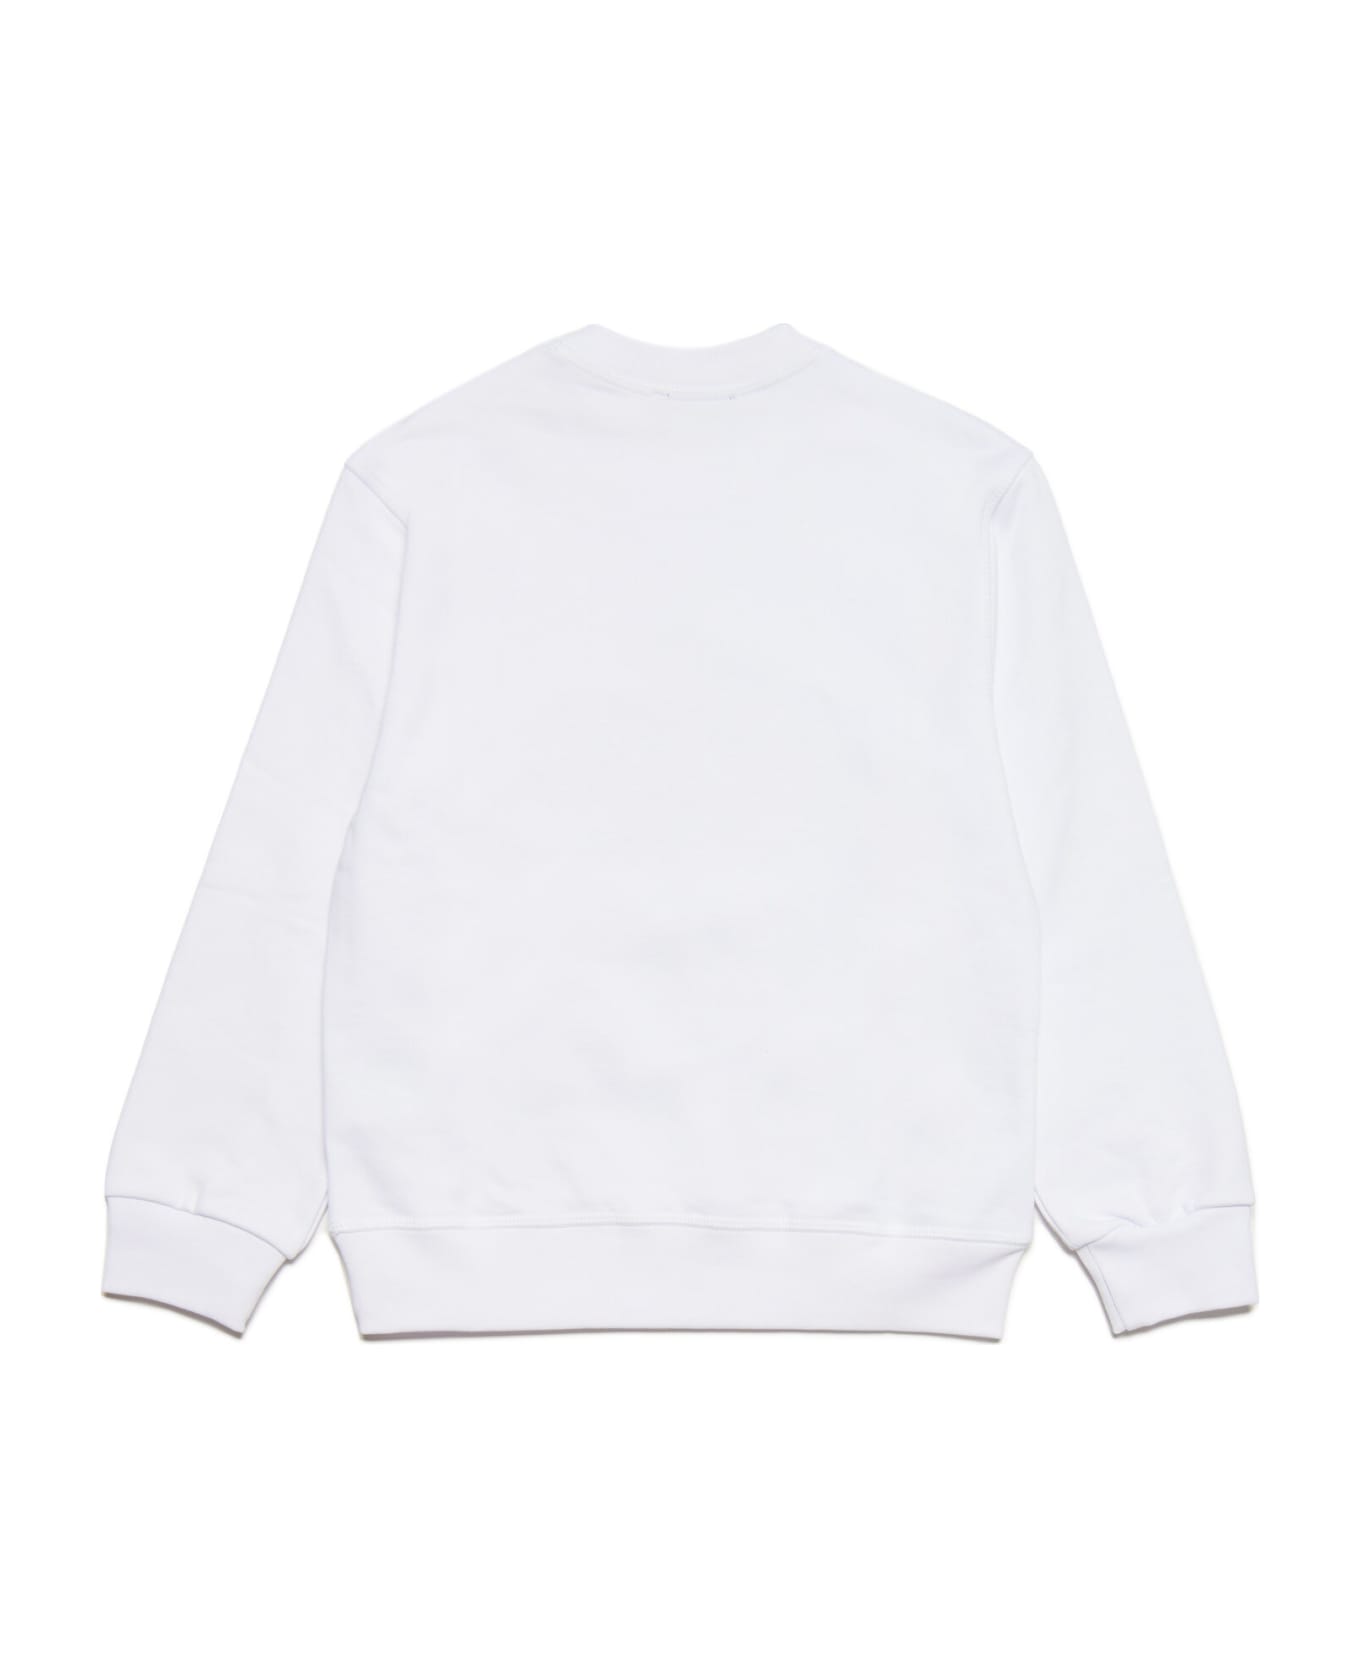 Dsquared2 D2s695u Relax Sweat-shirt Dsquared White Compass Sweatshirt With Maple Leaf - White